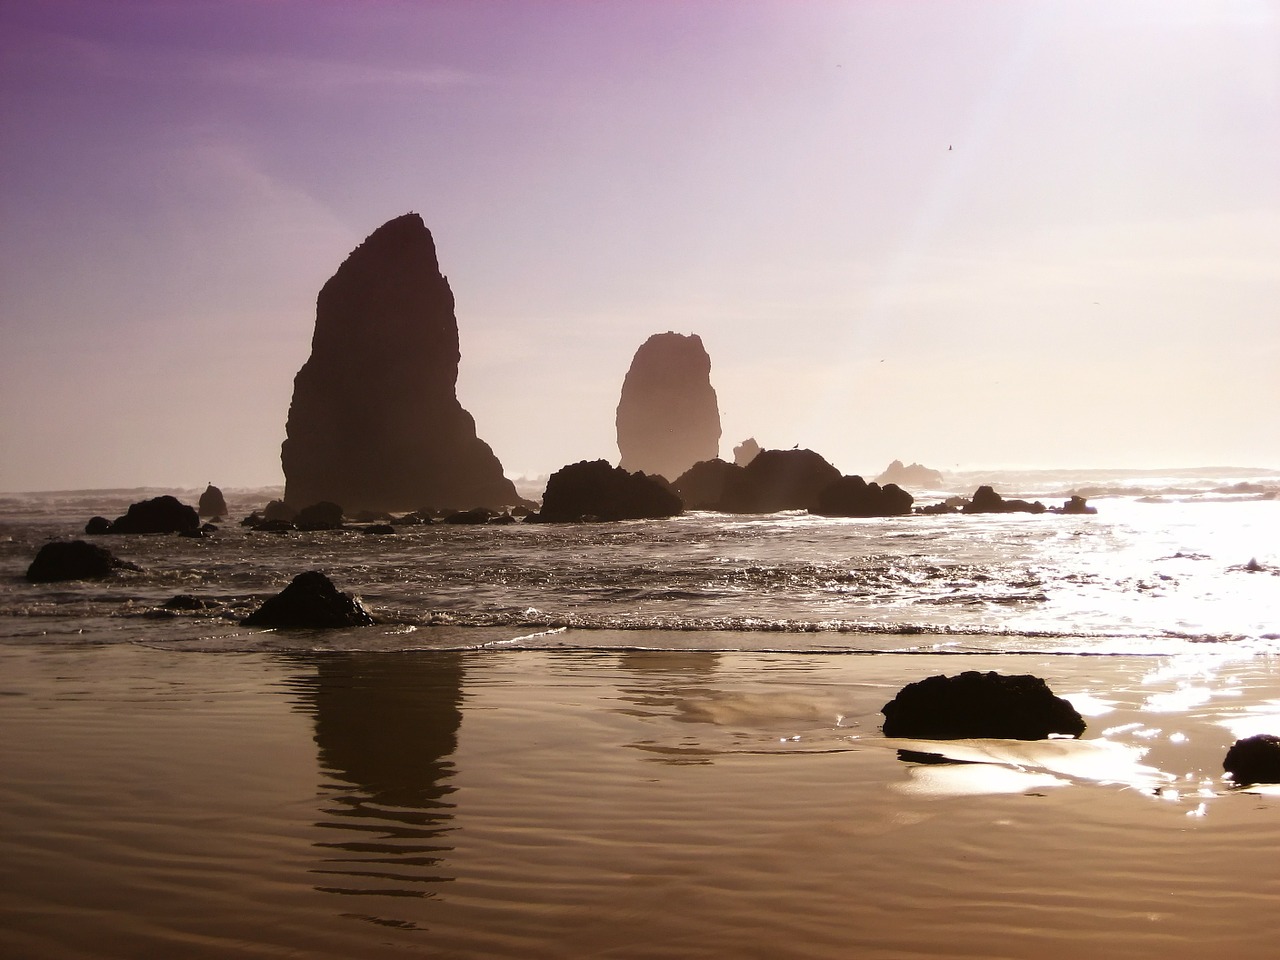 Rocks in the ocean at the Oregon Coast. Tall rocks stand in the water in the distance. Gentle waves roll in.